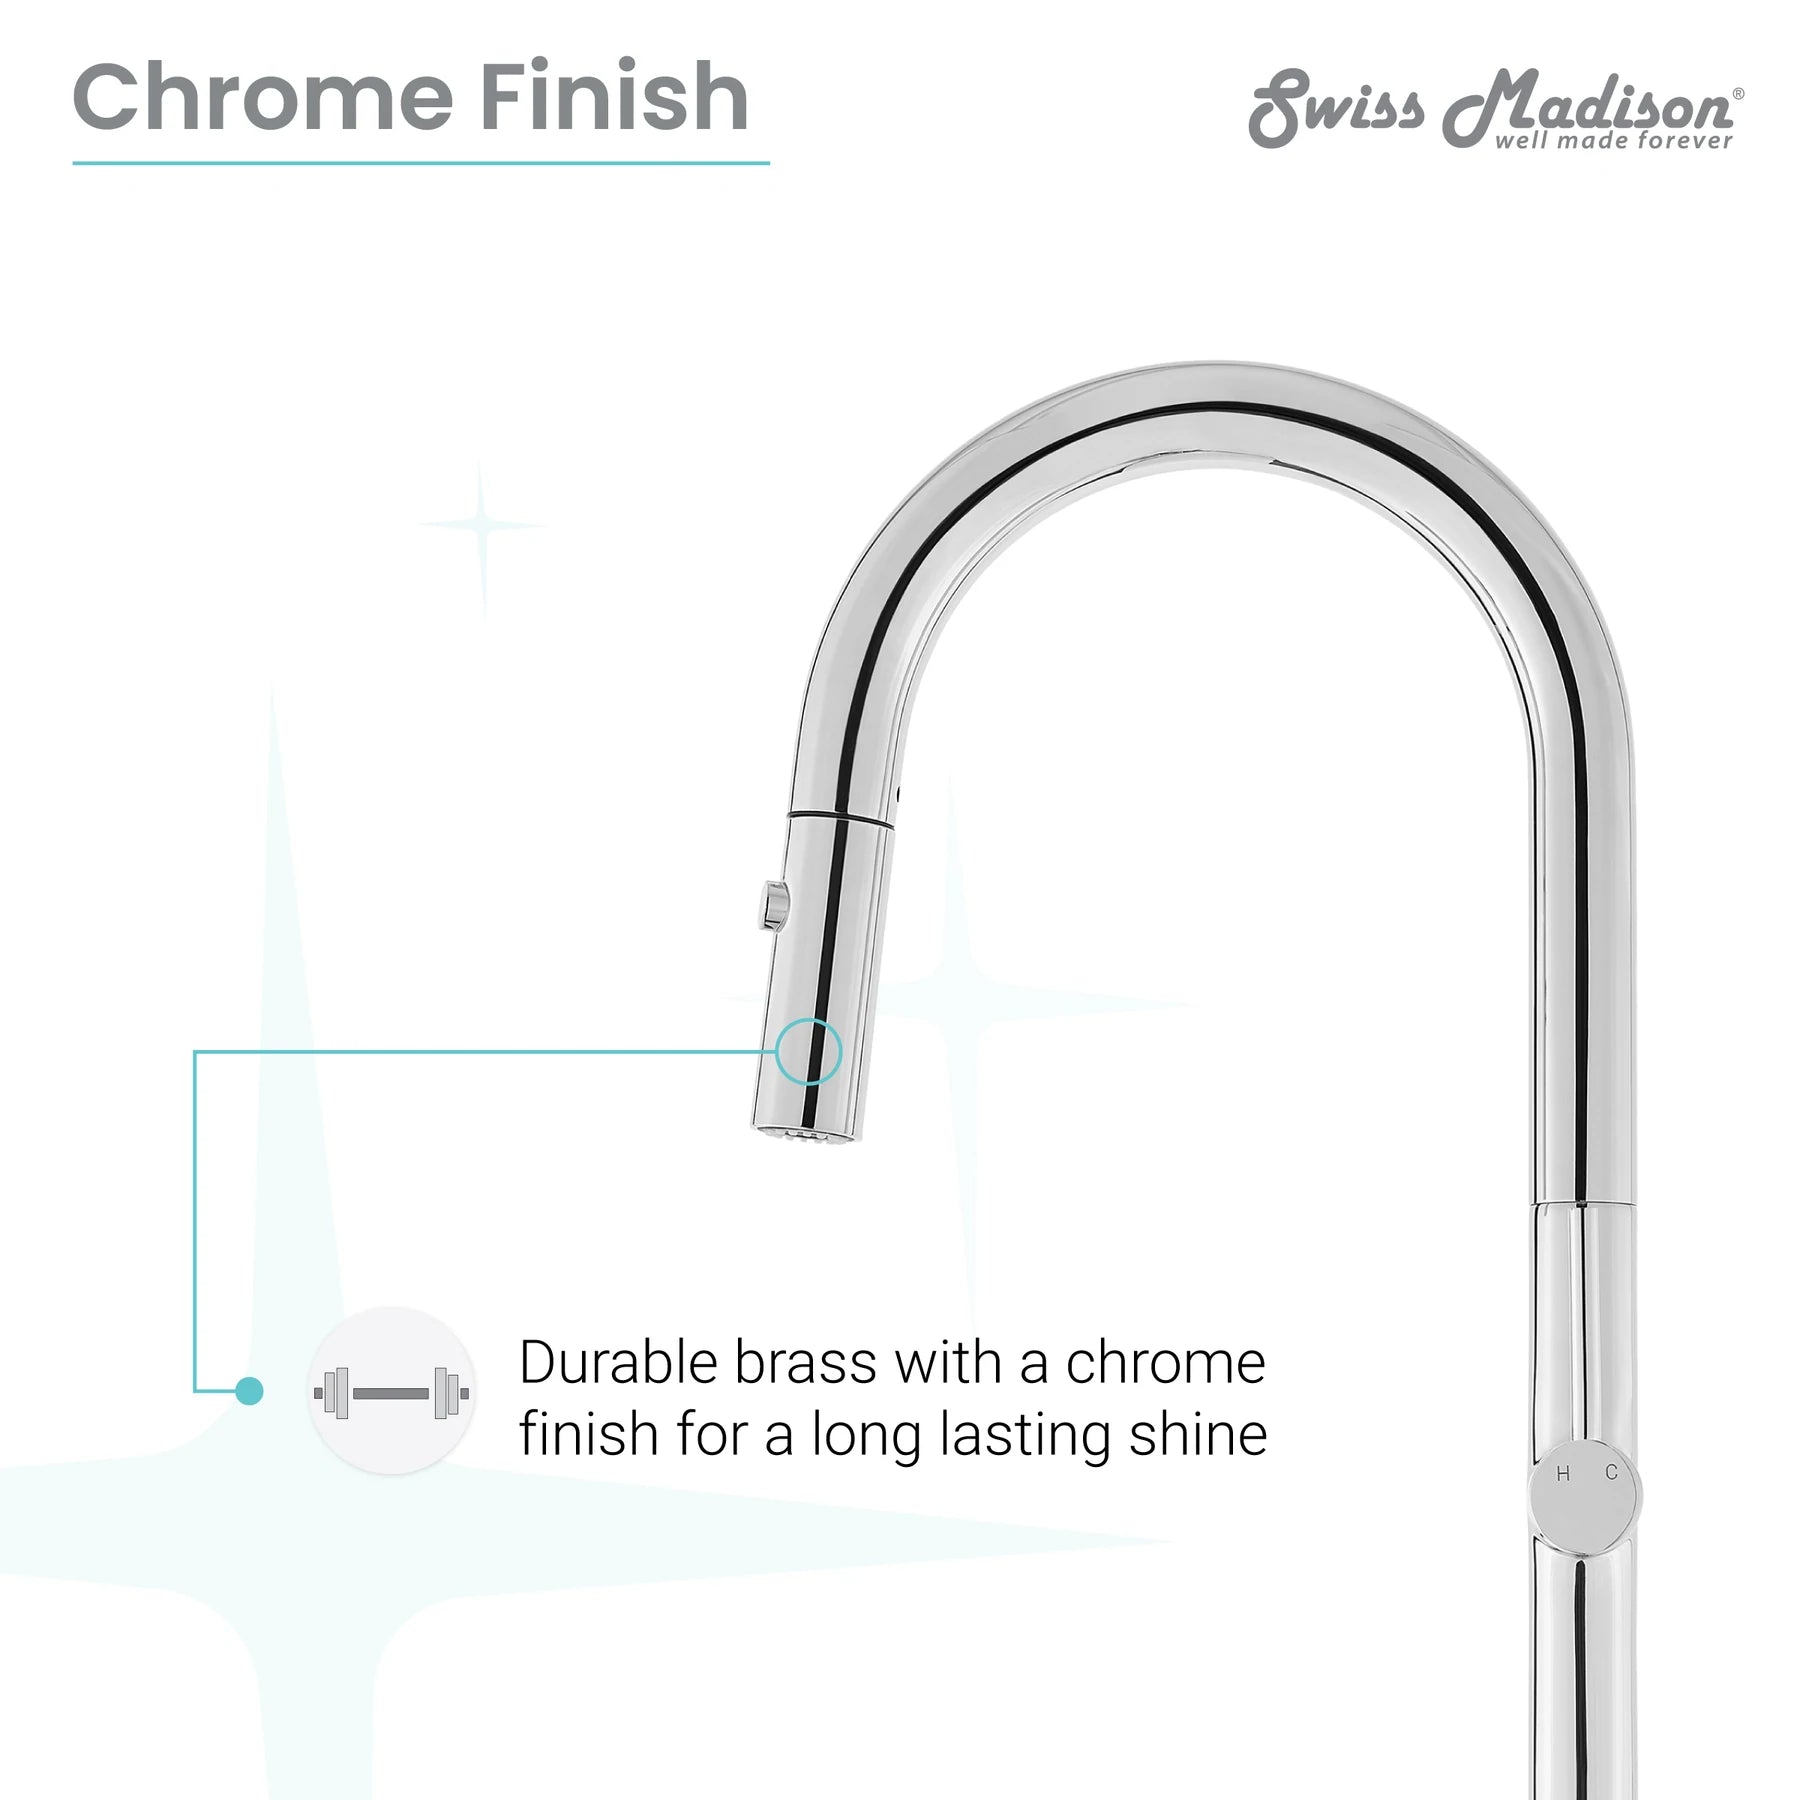 Swiss Madison Chalet Single Handle, Pull-Down Kitchen Faucet - SM-KF73